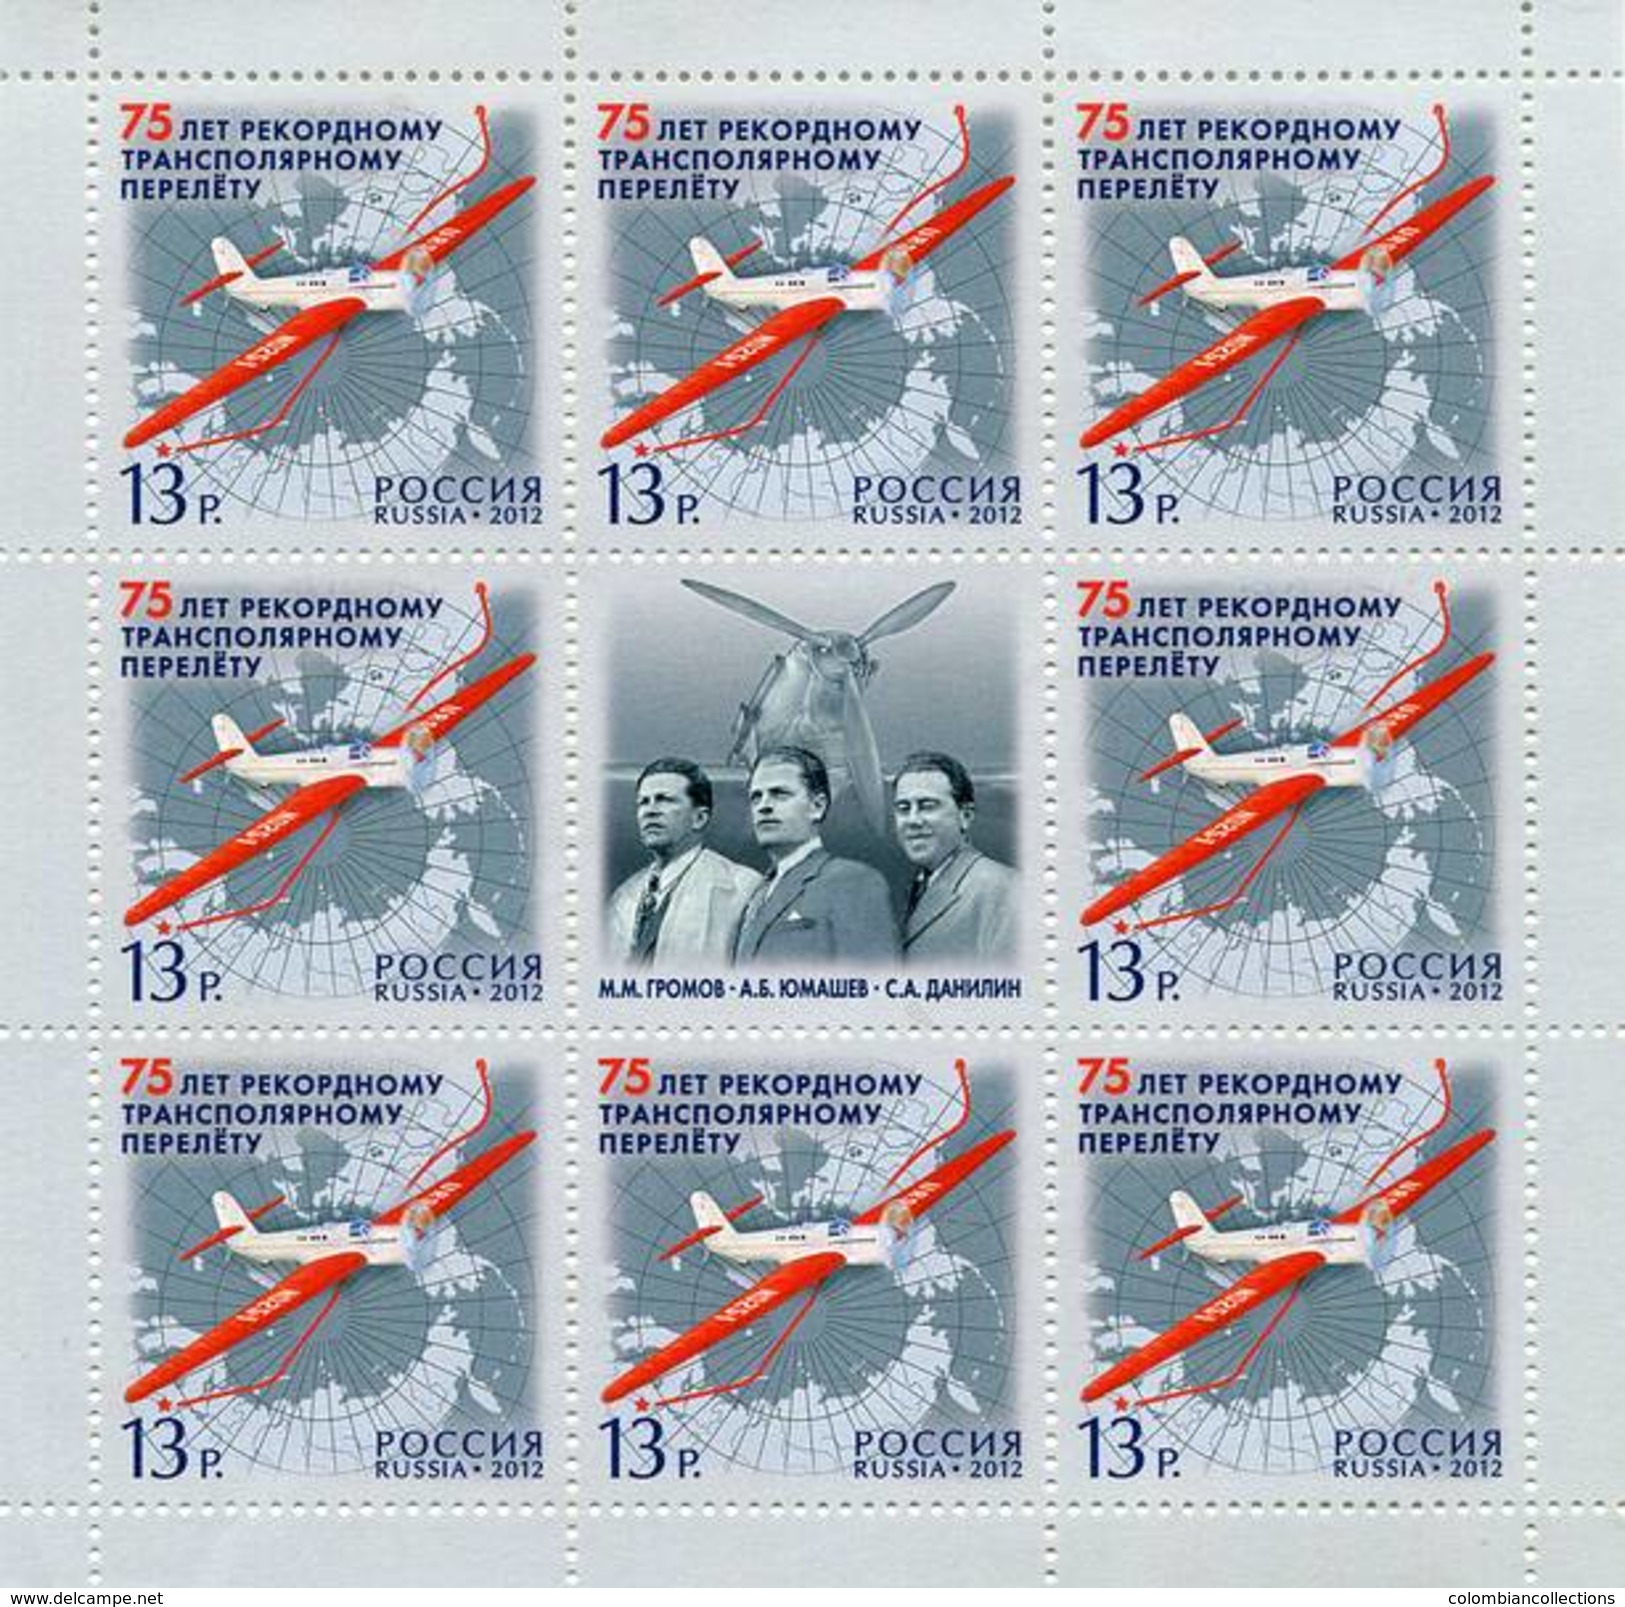 Lote 31217bP, 2012, Rusia, Russia, Pliego, Sheet, 75th Anniversary Of The Record Trans Polar Flight, Aircraft, ANT-25 - FDC